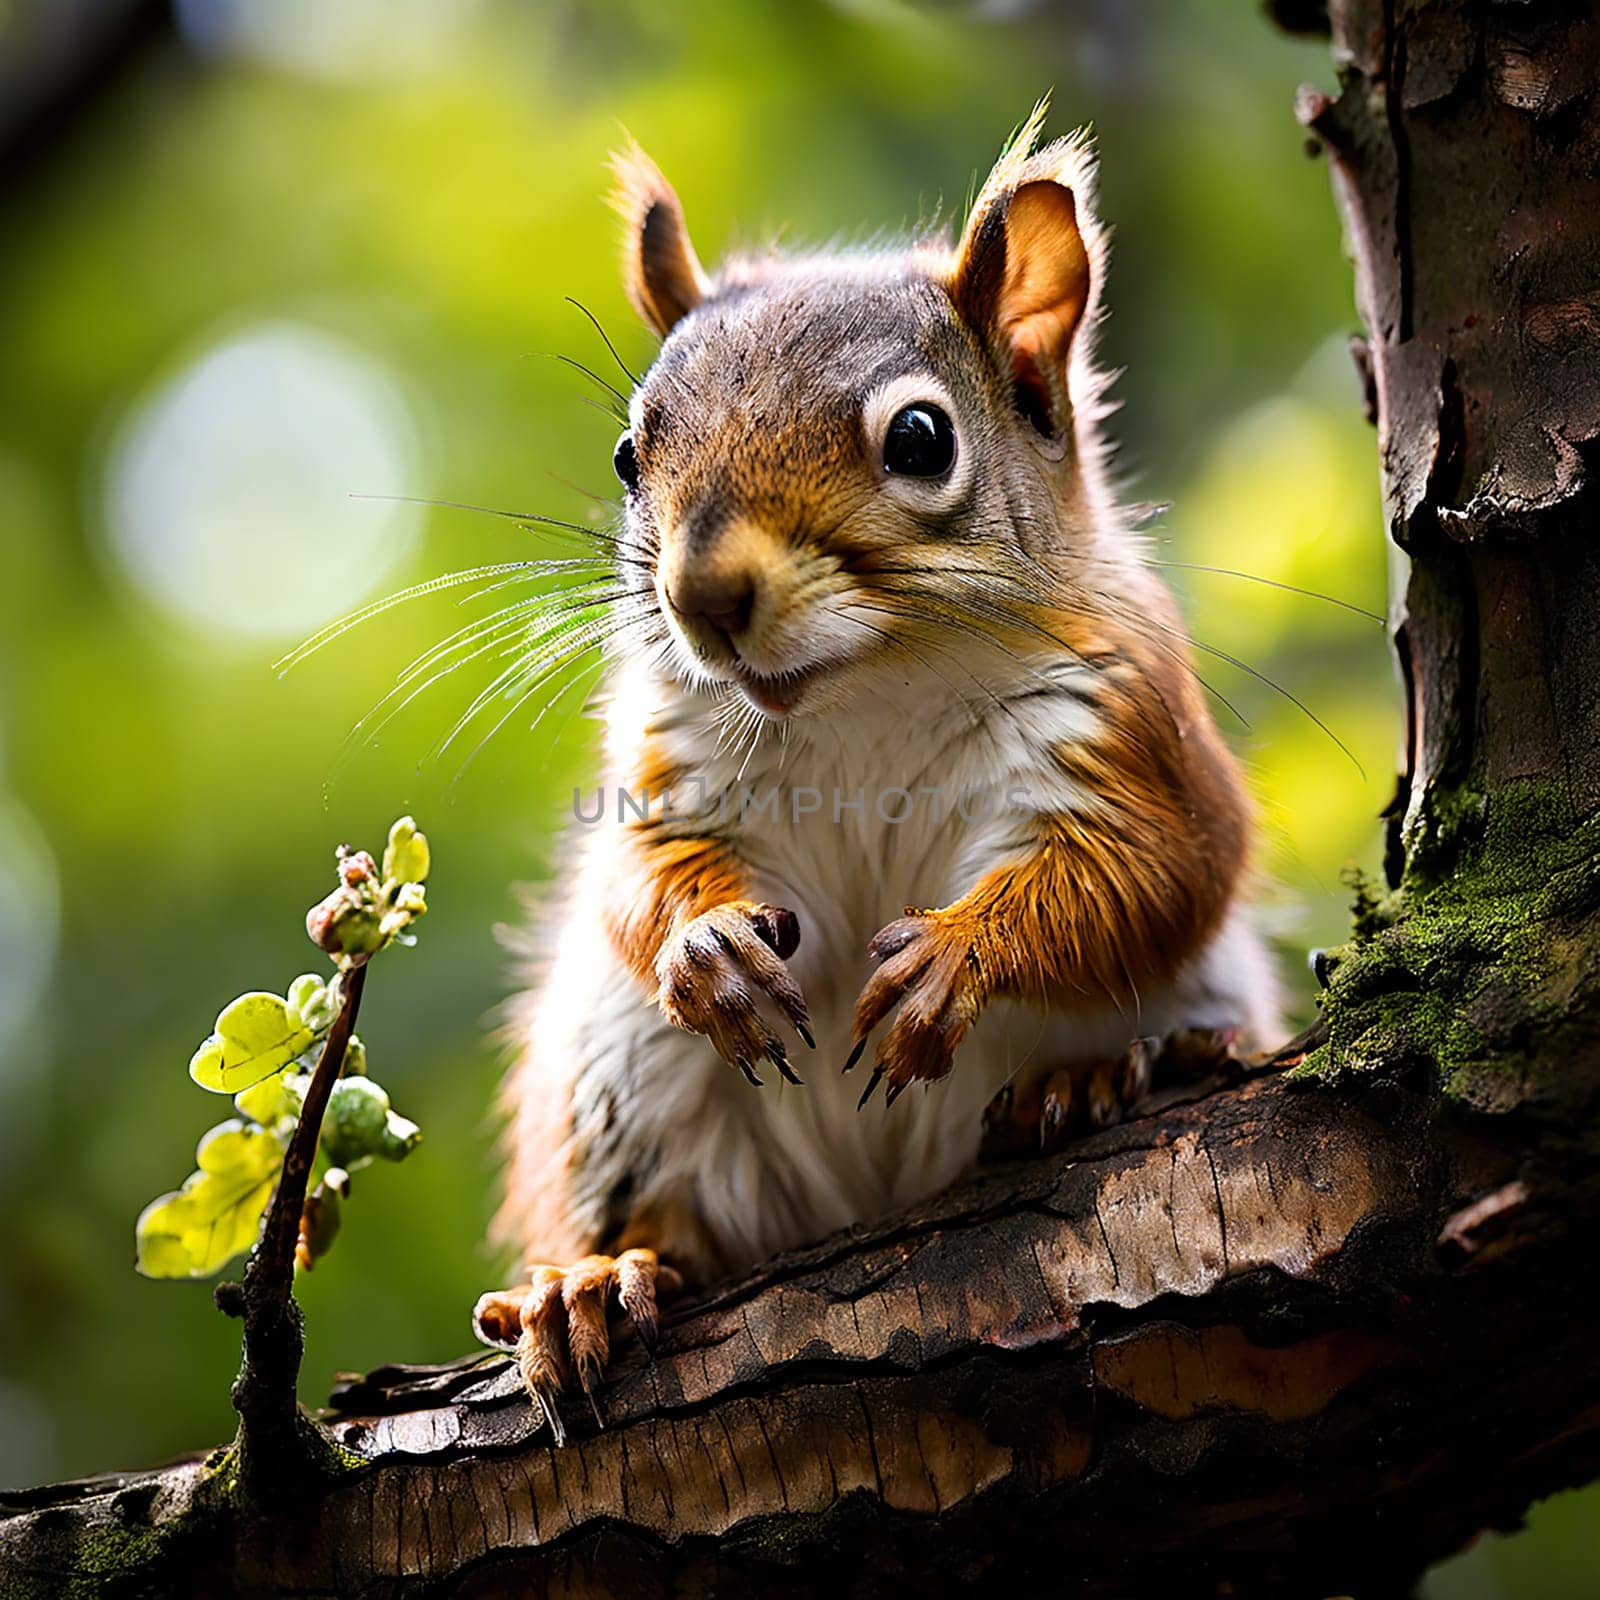 The Watchful Observer: A Squirrel Sitting on a Tree Branch by Petrichor